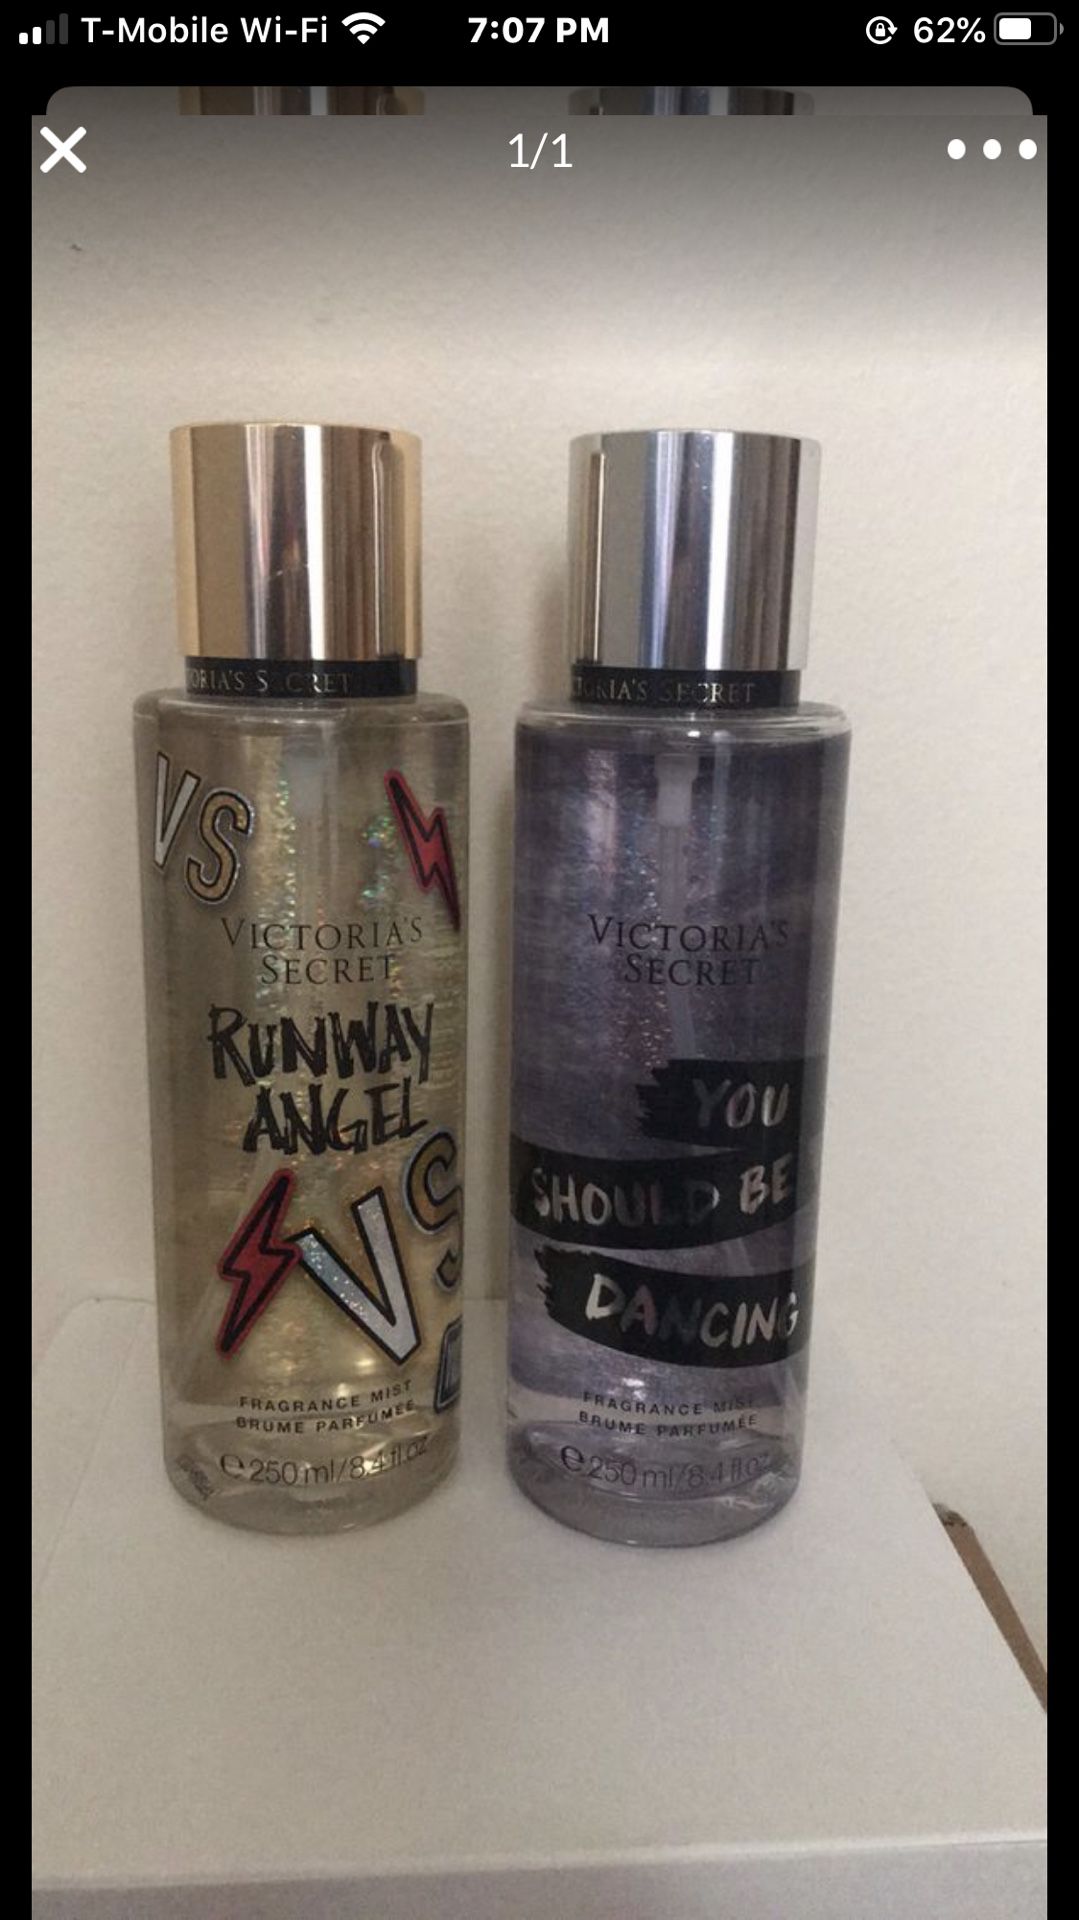 Victoria’s Secret Duo Fragance Mist e250ml/8.4fl Oz Runway Angel and You should be Dancing